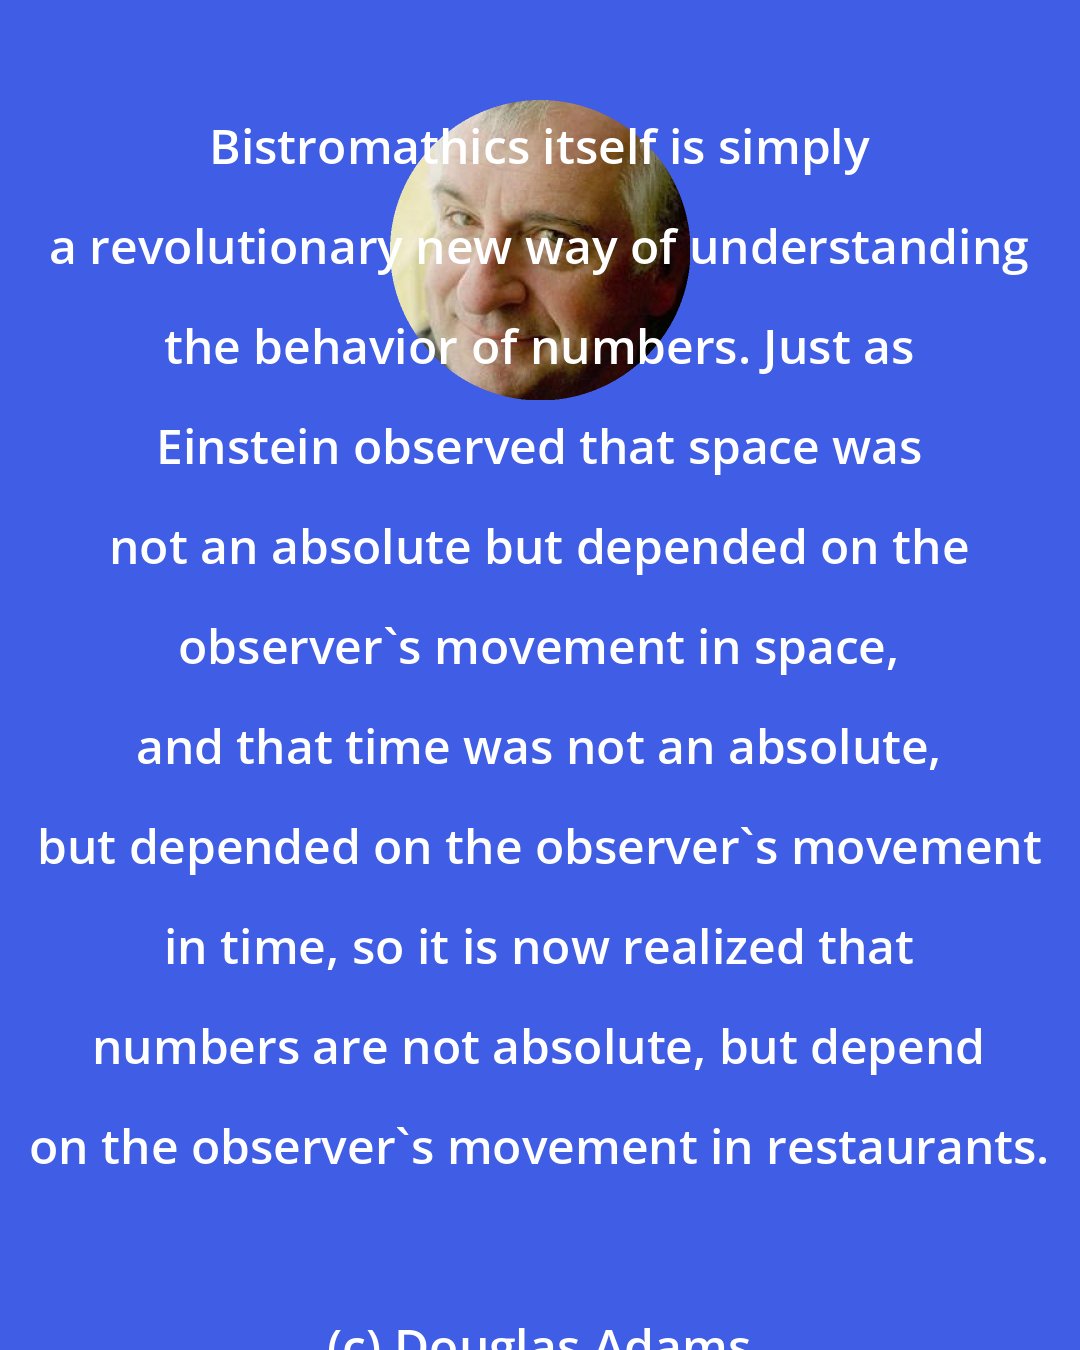 Douglas Adams: Bistromathics itself is simply a revolutionary new way of understanding the behavior of numbers. Just as Einstein observed that space was not an absolute but depended on the observer's movement in space, and that time was not an absolute, but depended on the observer's movement in time, so it is now realized that numbers are not absolute, but depend on the observer's movement in restaurants.